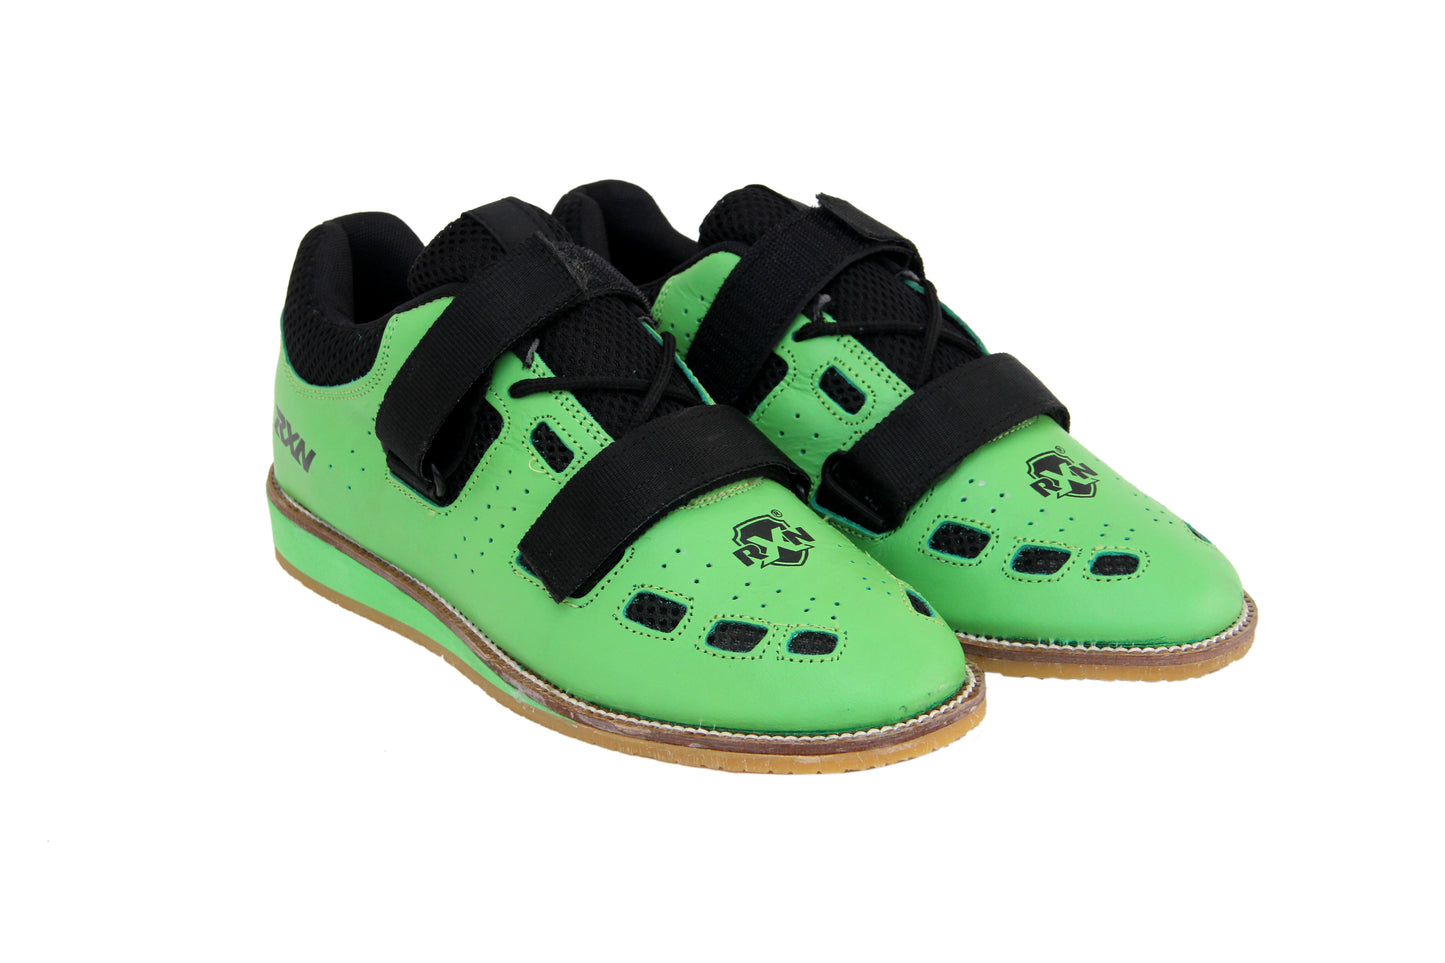 RXN World Star Weightlifting Shoes - RXN SPORTS